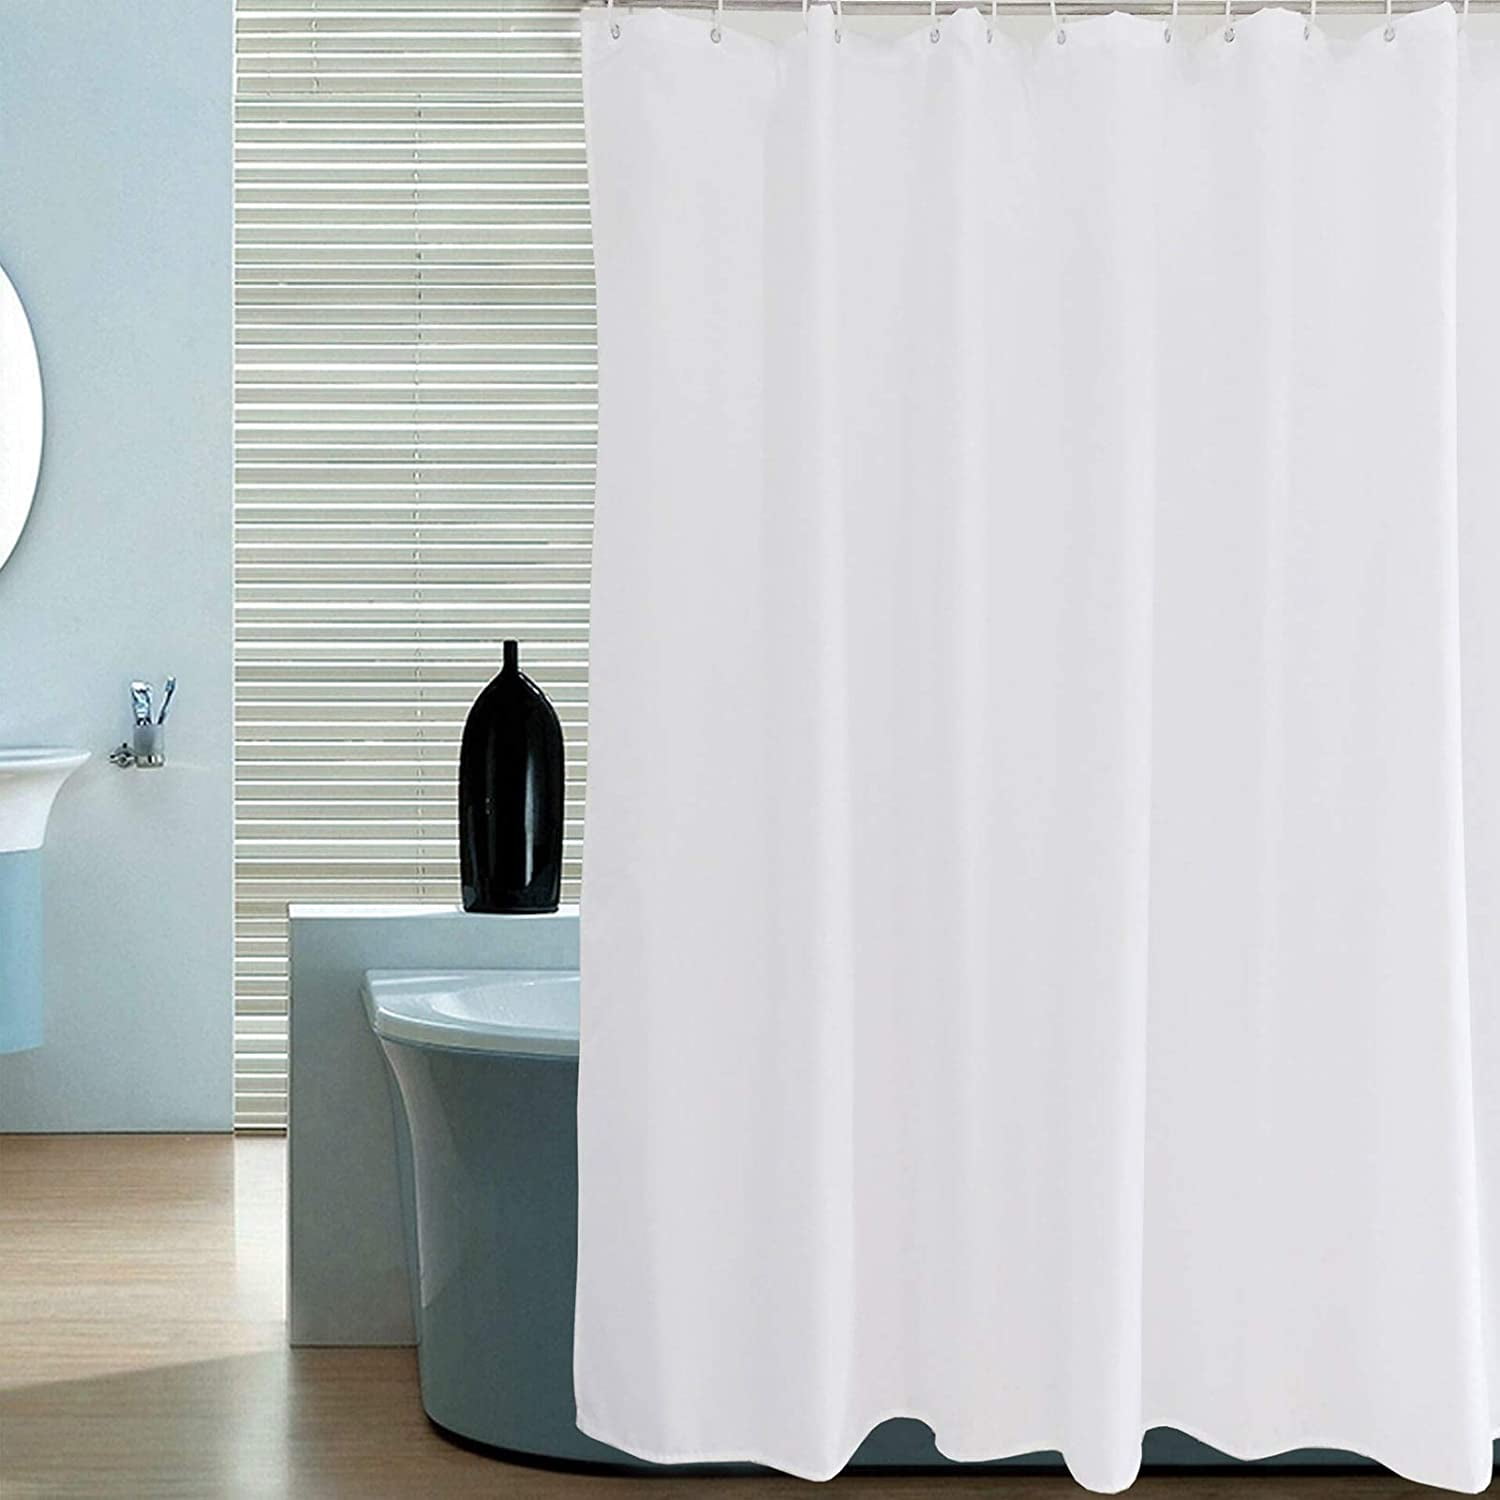 Bubble Car Waterproof Bathroom Polyester Shower Curtain Liner Water Resistant 